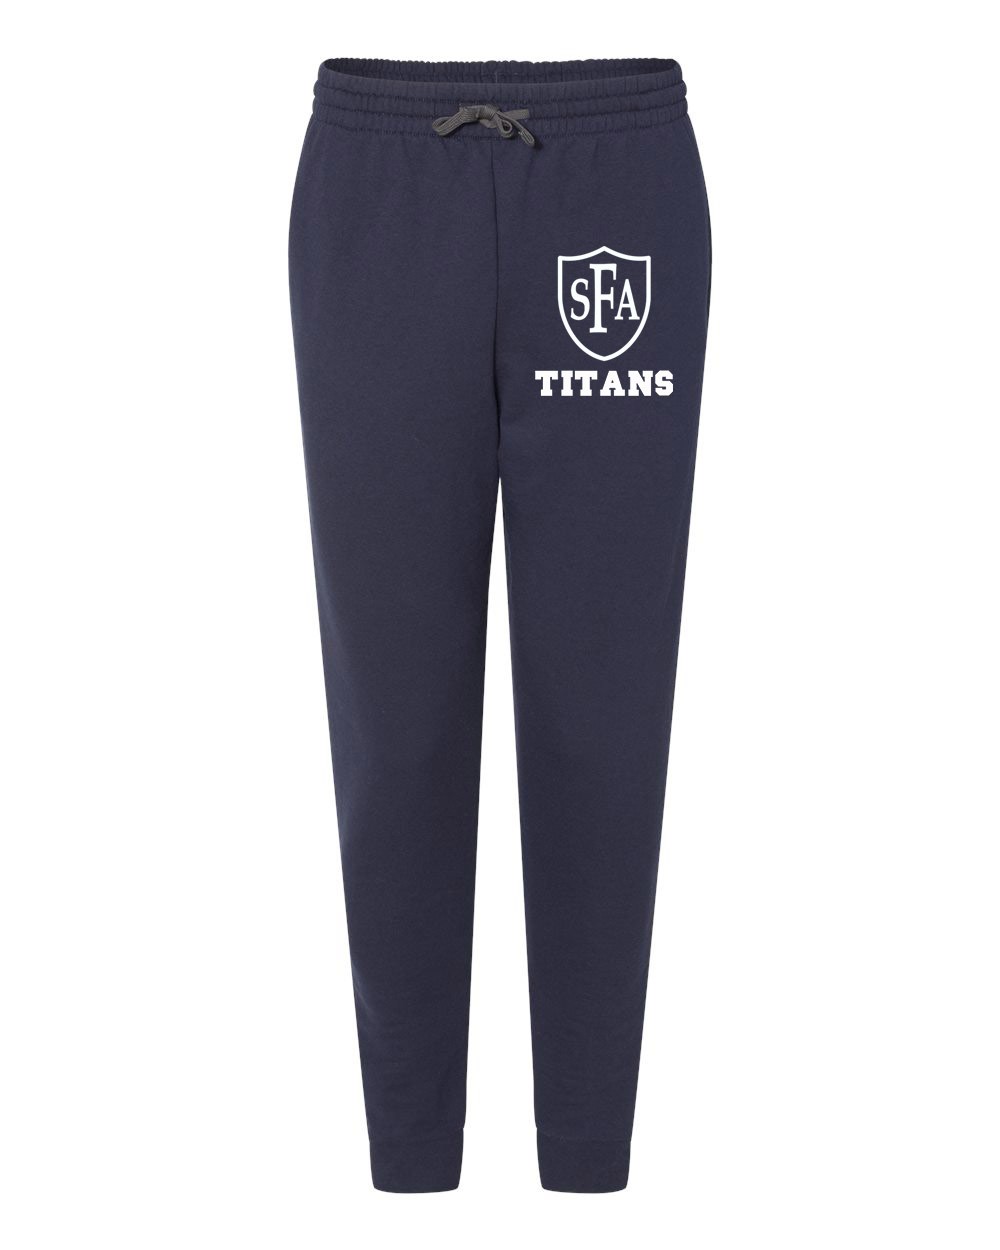 SFA Spirit Joggers w/ Titan Logo - Please Allow 2-3 Weeks for Delivery